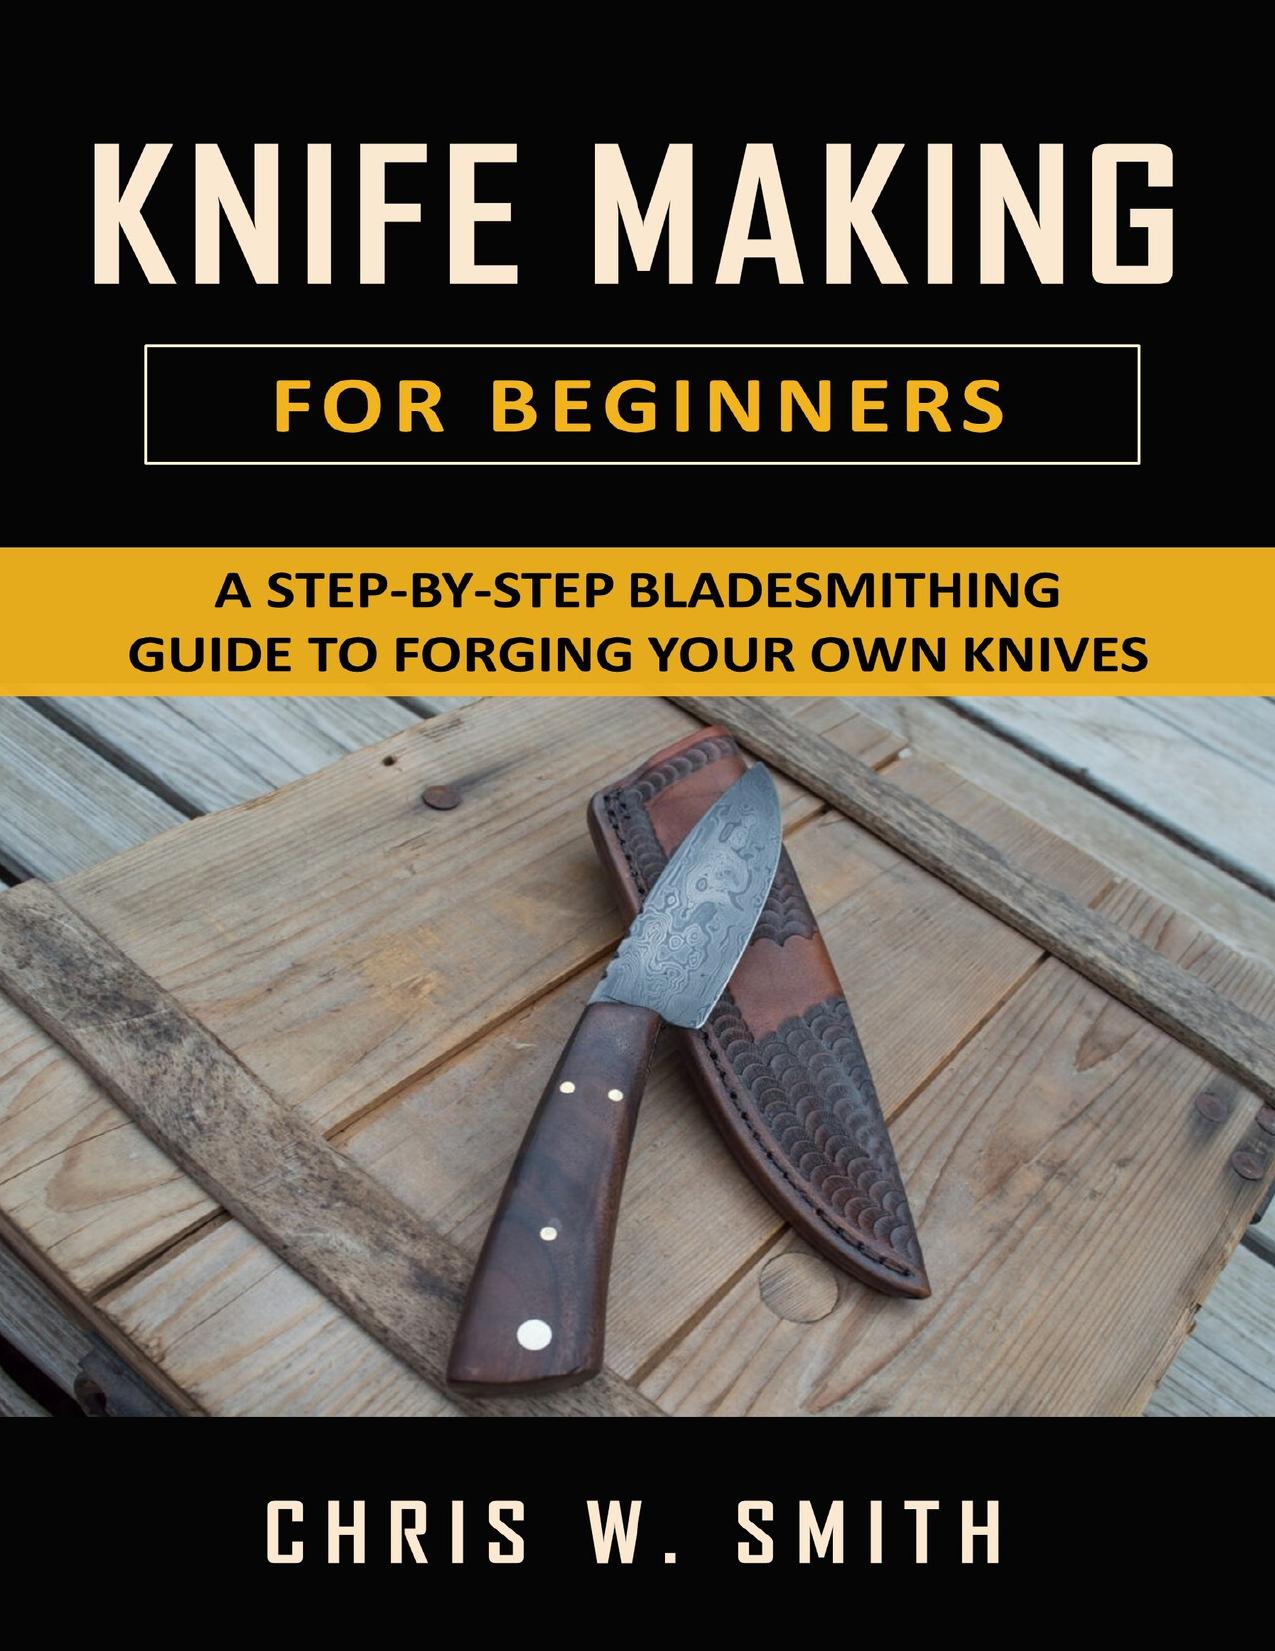 Knifemaking for Beginners: A Step-by-Step Bladesmithing Guide to Forging your own Knives with Basic Tools by W. Smith Chris